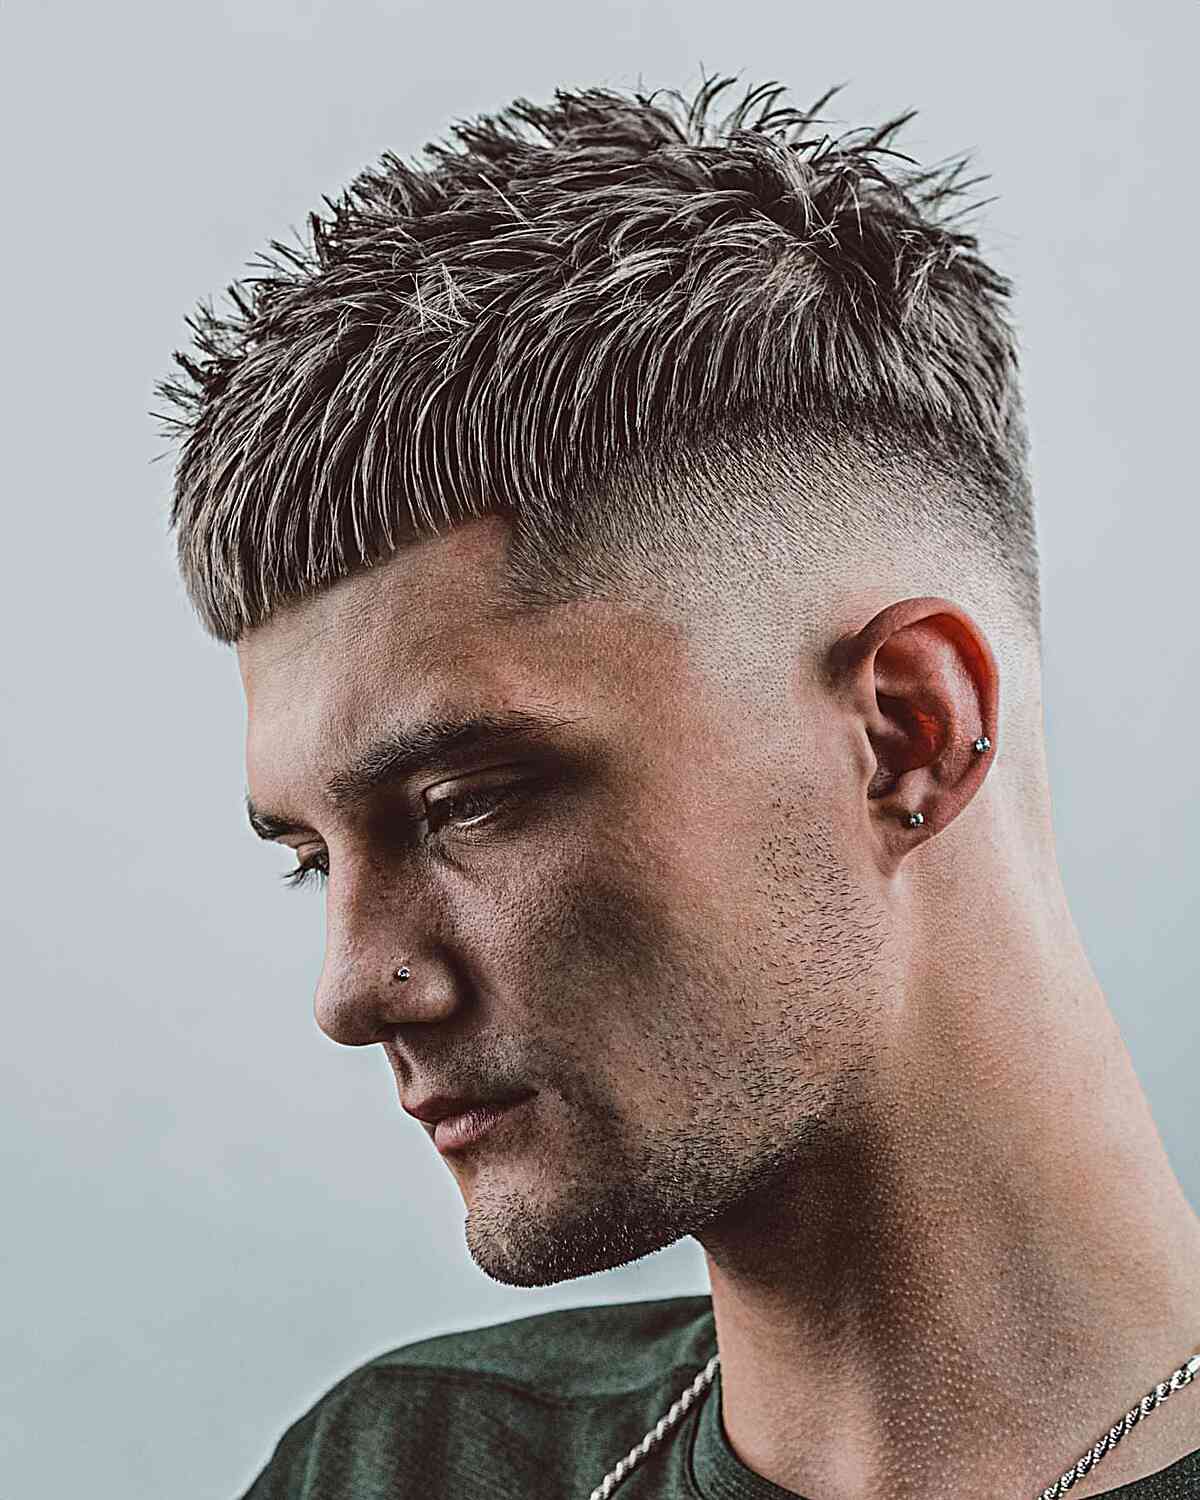 1000+ Hairstyles For Men (New Style Haircut 2023) - [485+] Mood off DP,  Images, Photos, Pics, Download (2023)